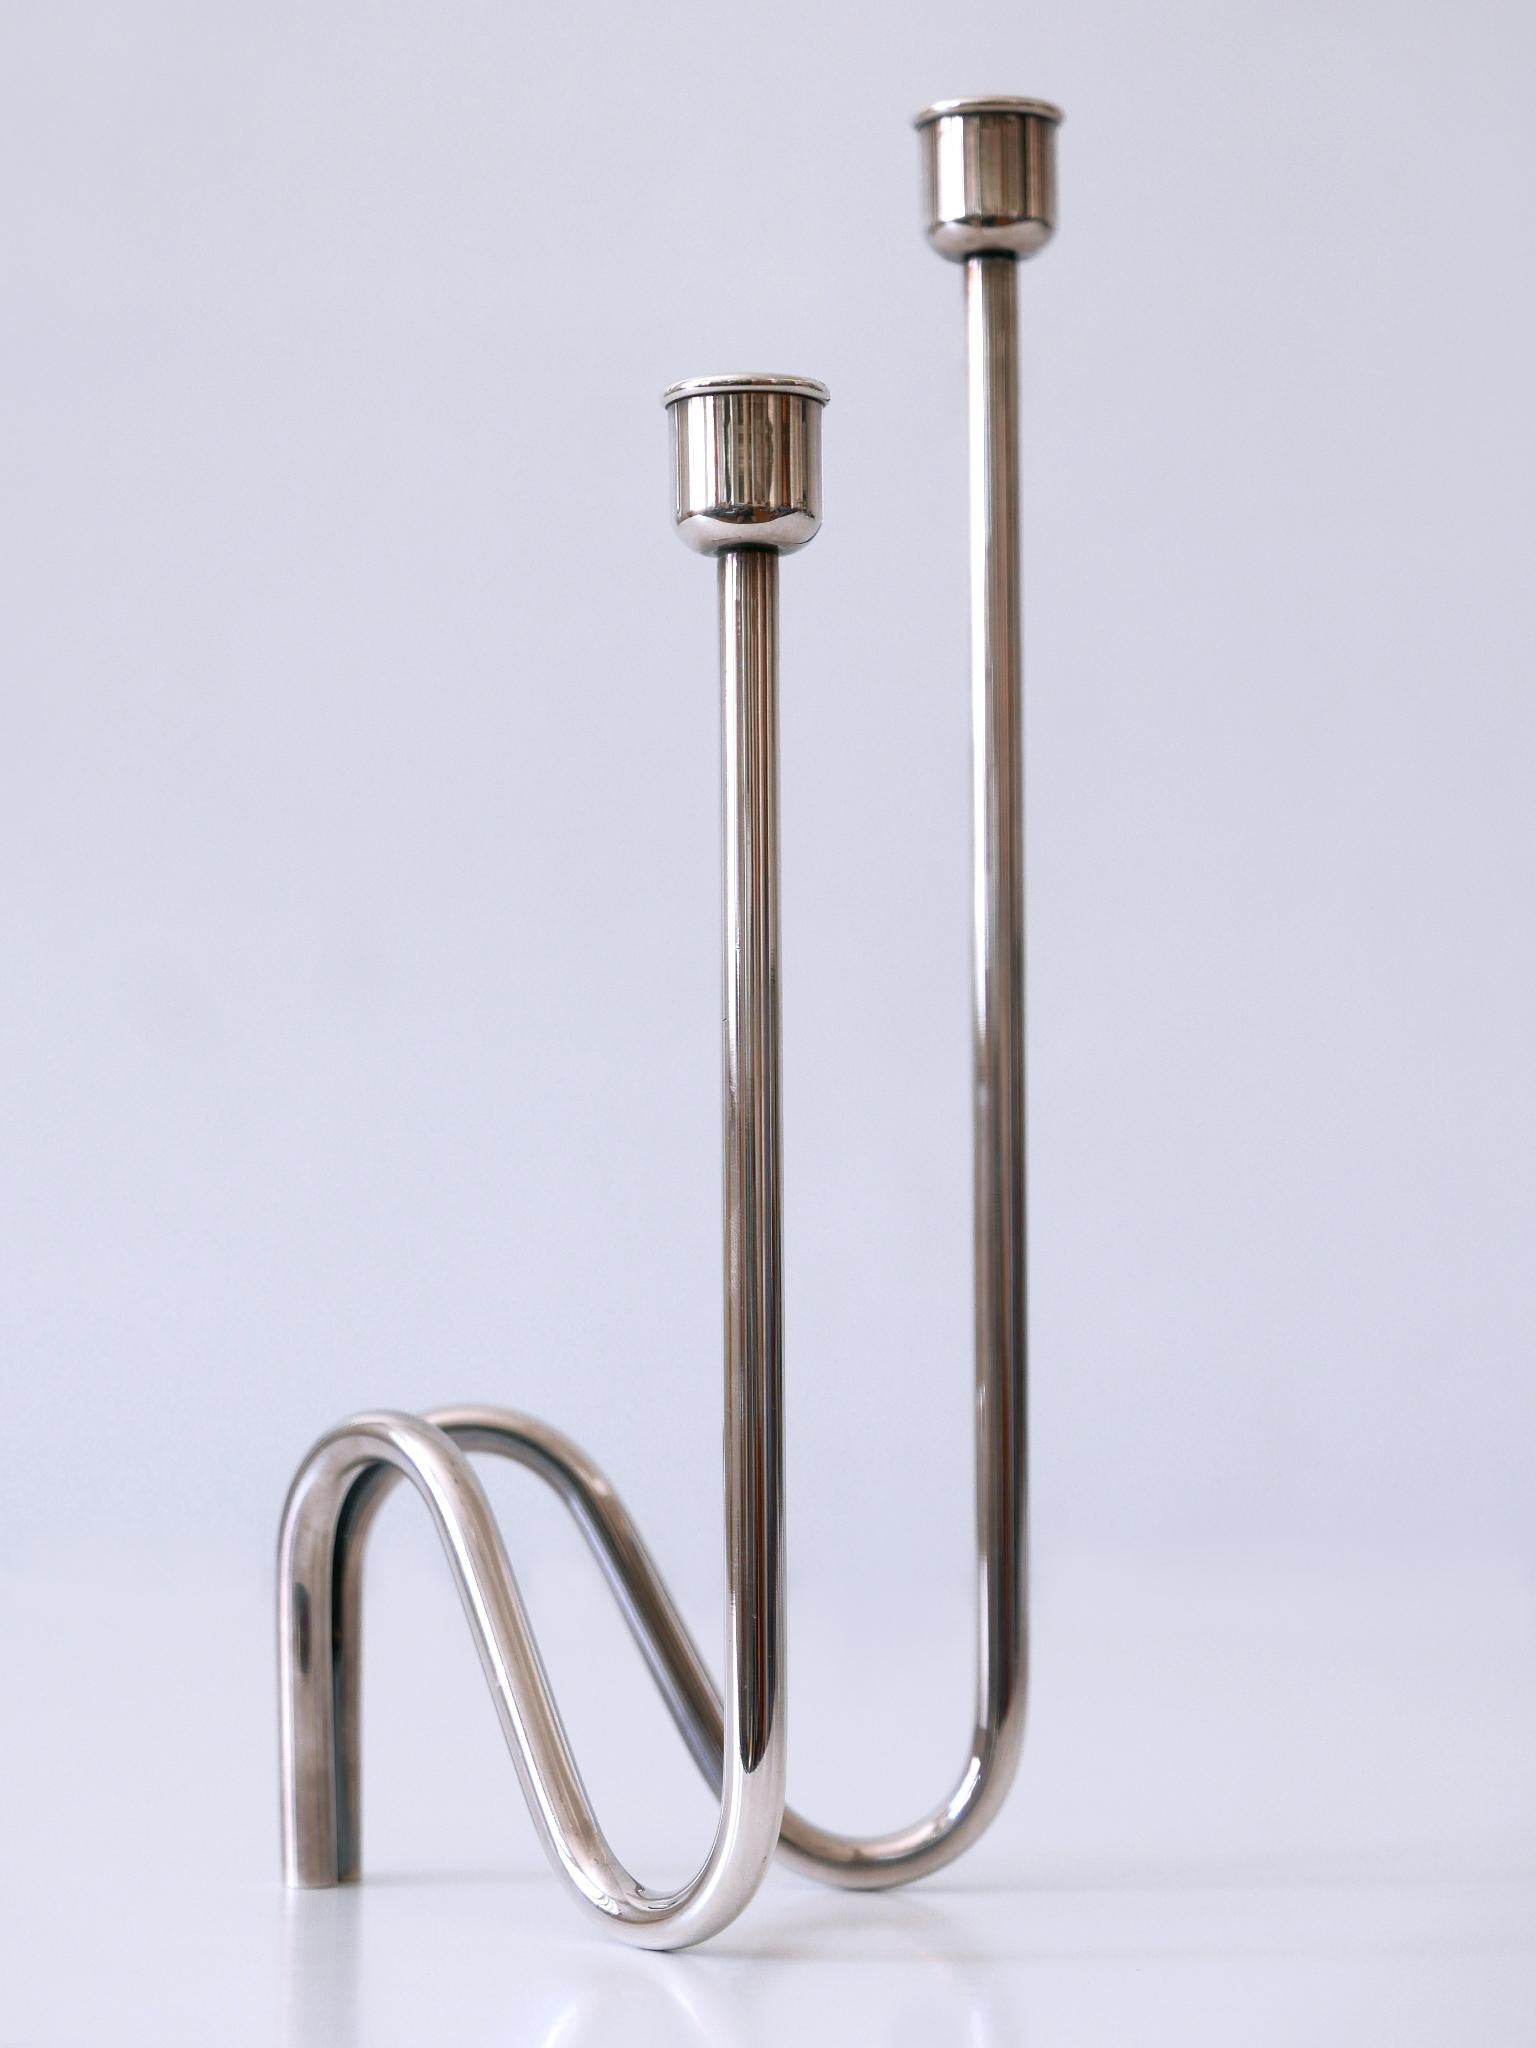 Silvered Elegant Mid-Century Modern Candle Holder Flamma by Lino Sabattini Italy 1970s For Sale